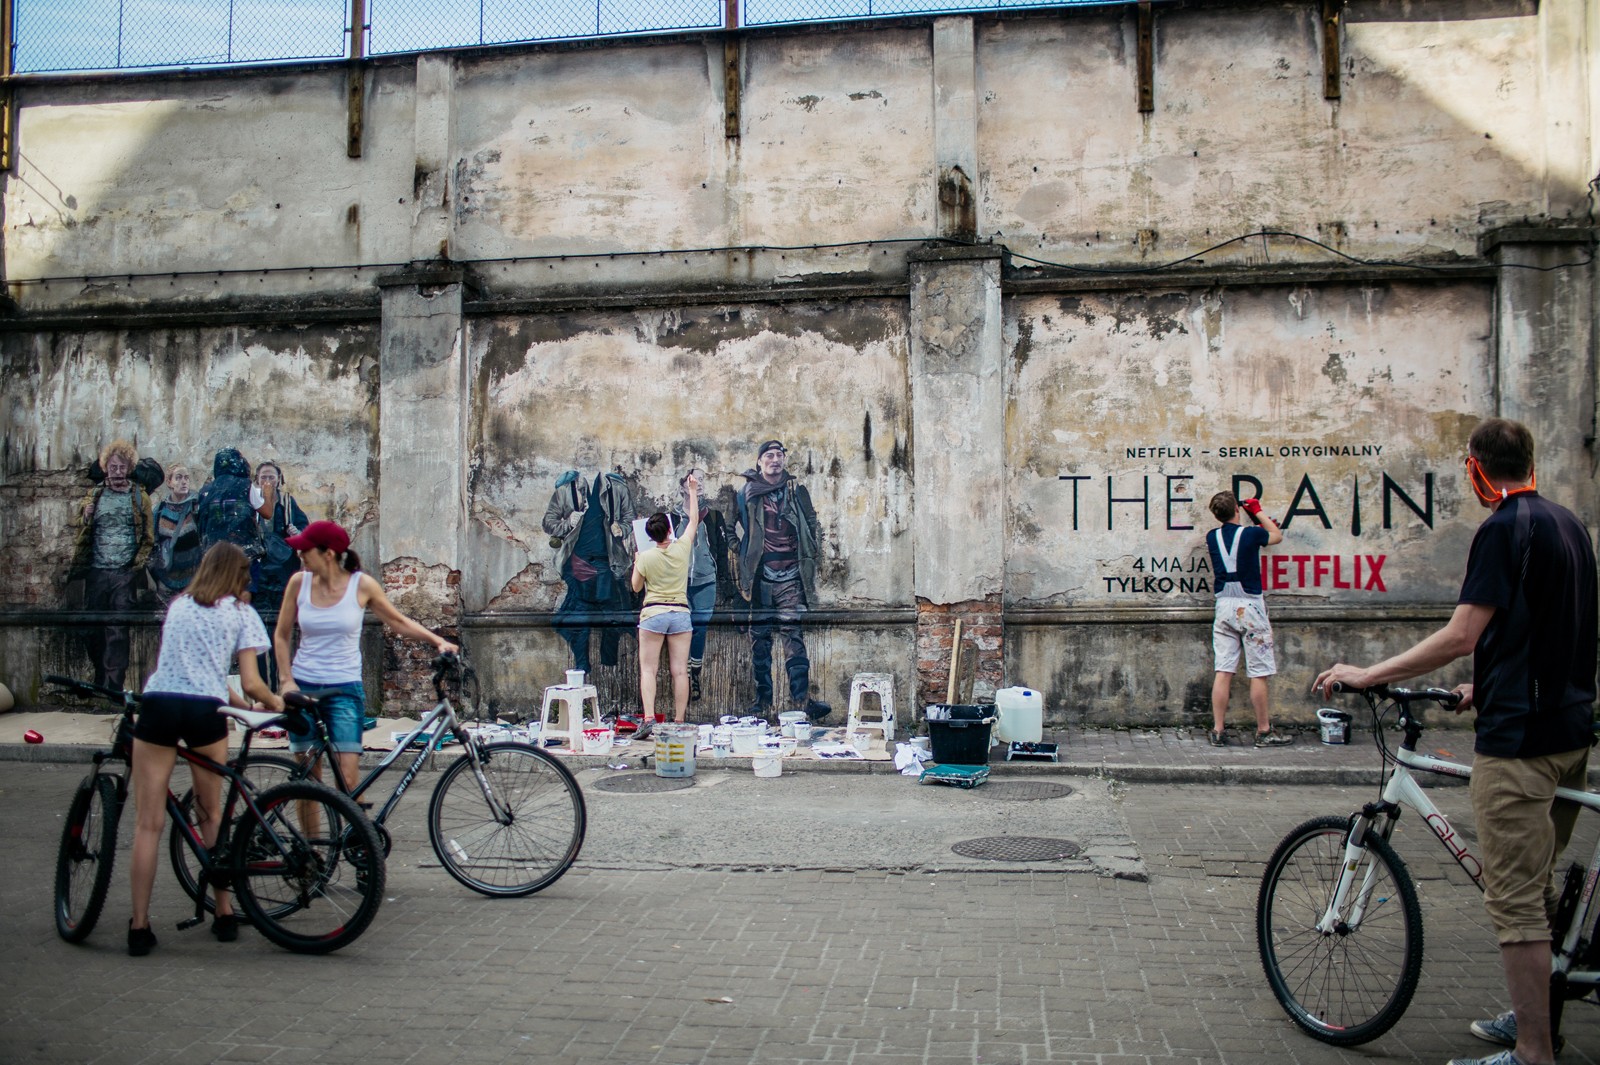 Tytano: Kraków's Urban Lifestyle Complex ad in the form of a wall mural | The Rain  | Portfolio